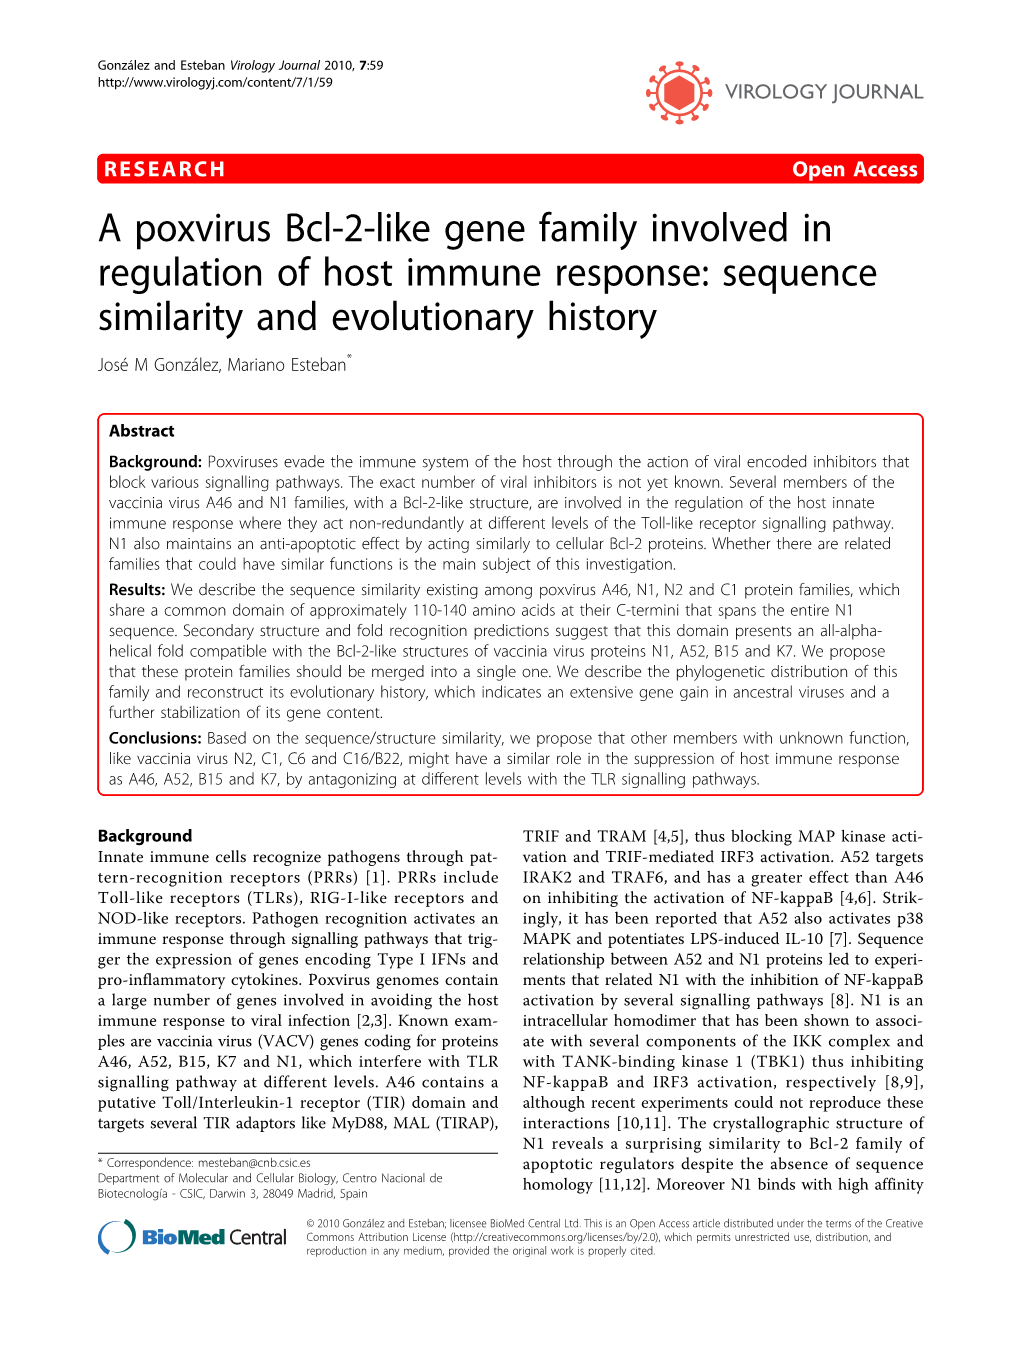 A Poxvirus Bcl-2-Like Gene Family Involved in Regulation of Host Immune Response: Sequence Similarity and Evolutionary History José M González, Mariano Esteban*